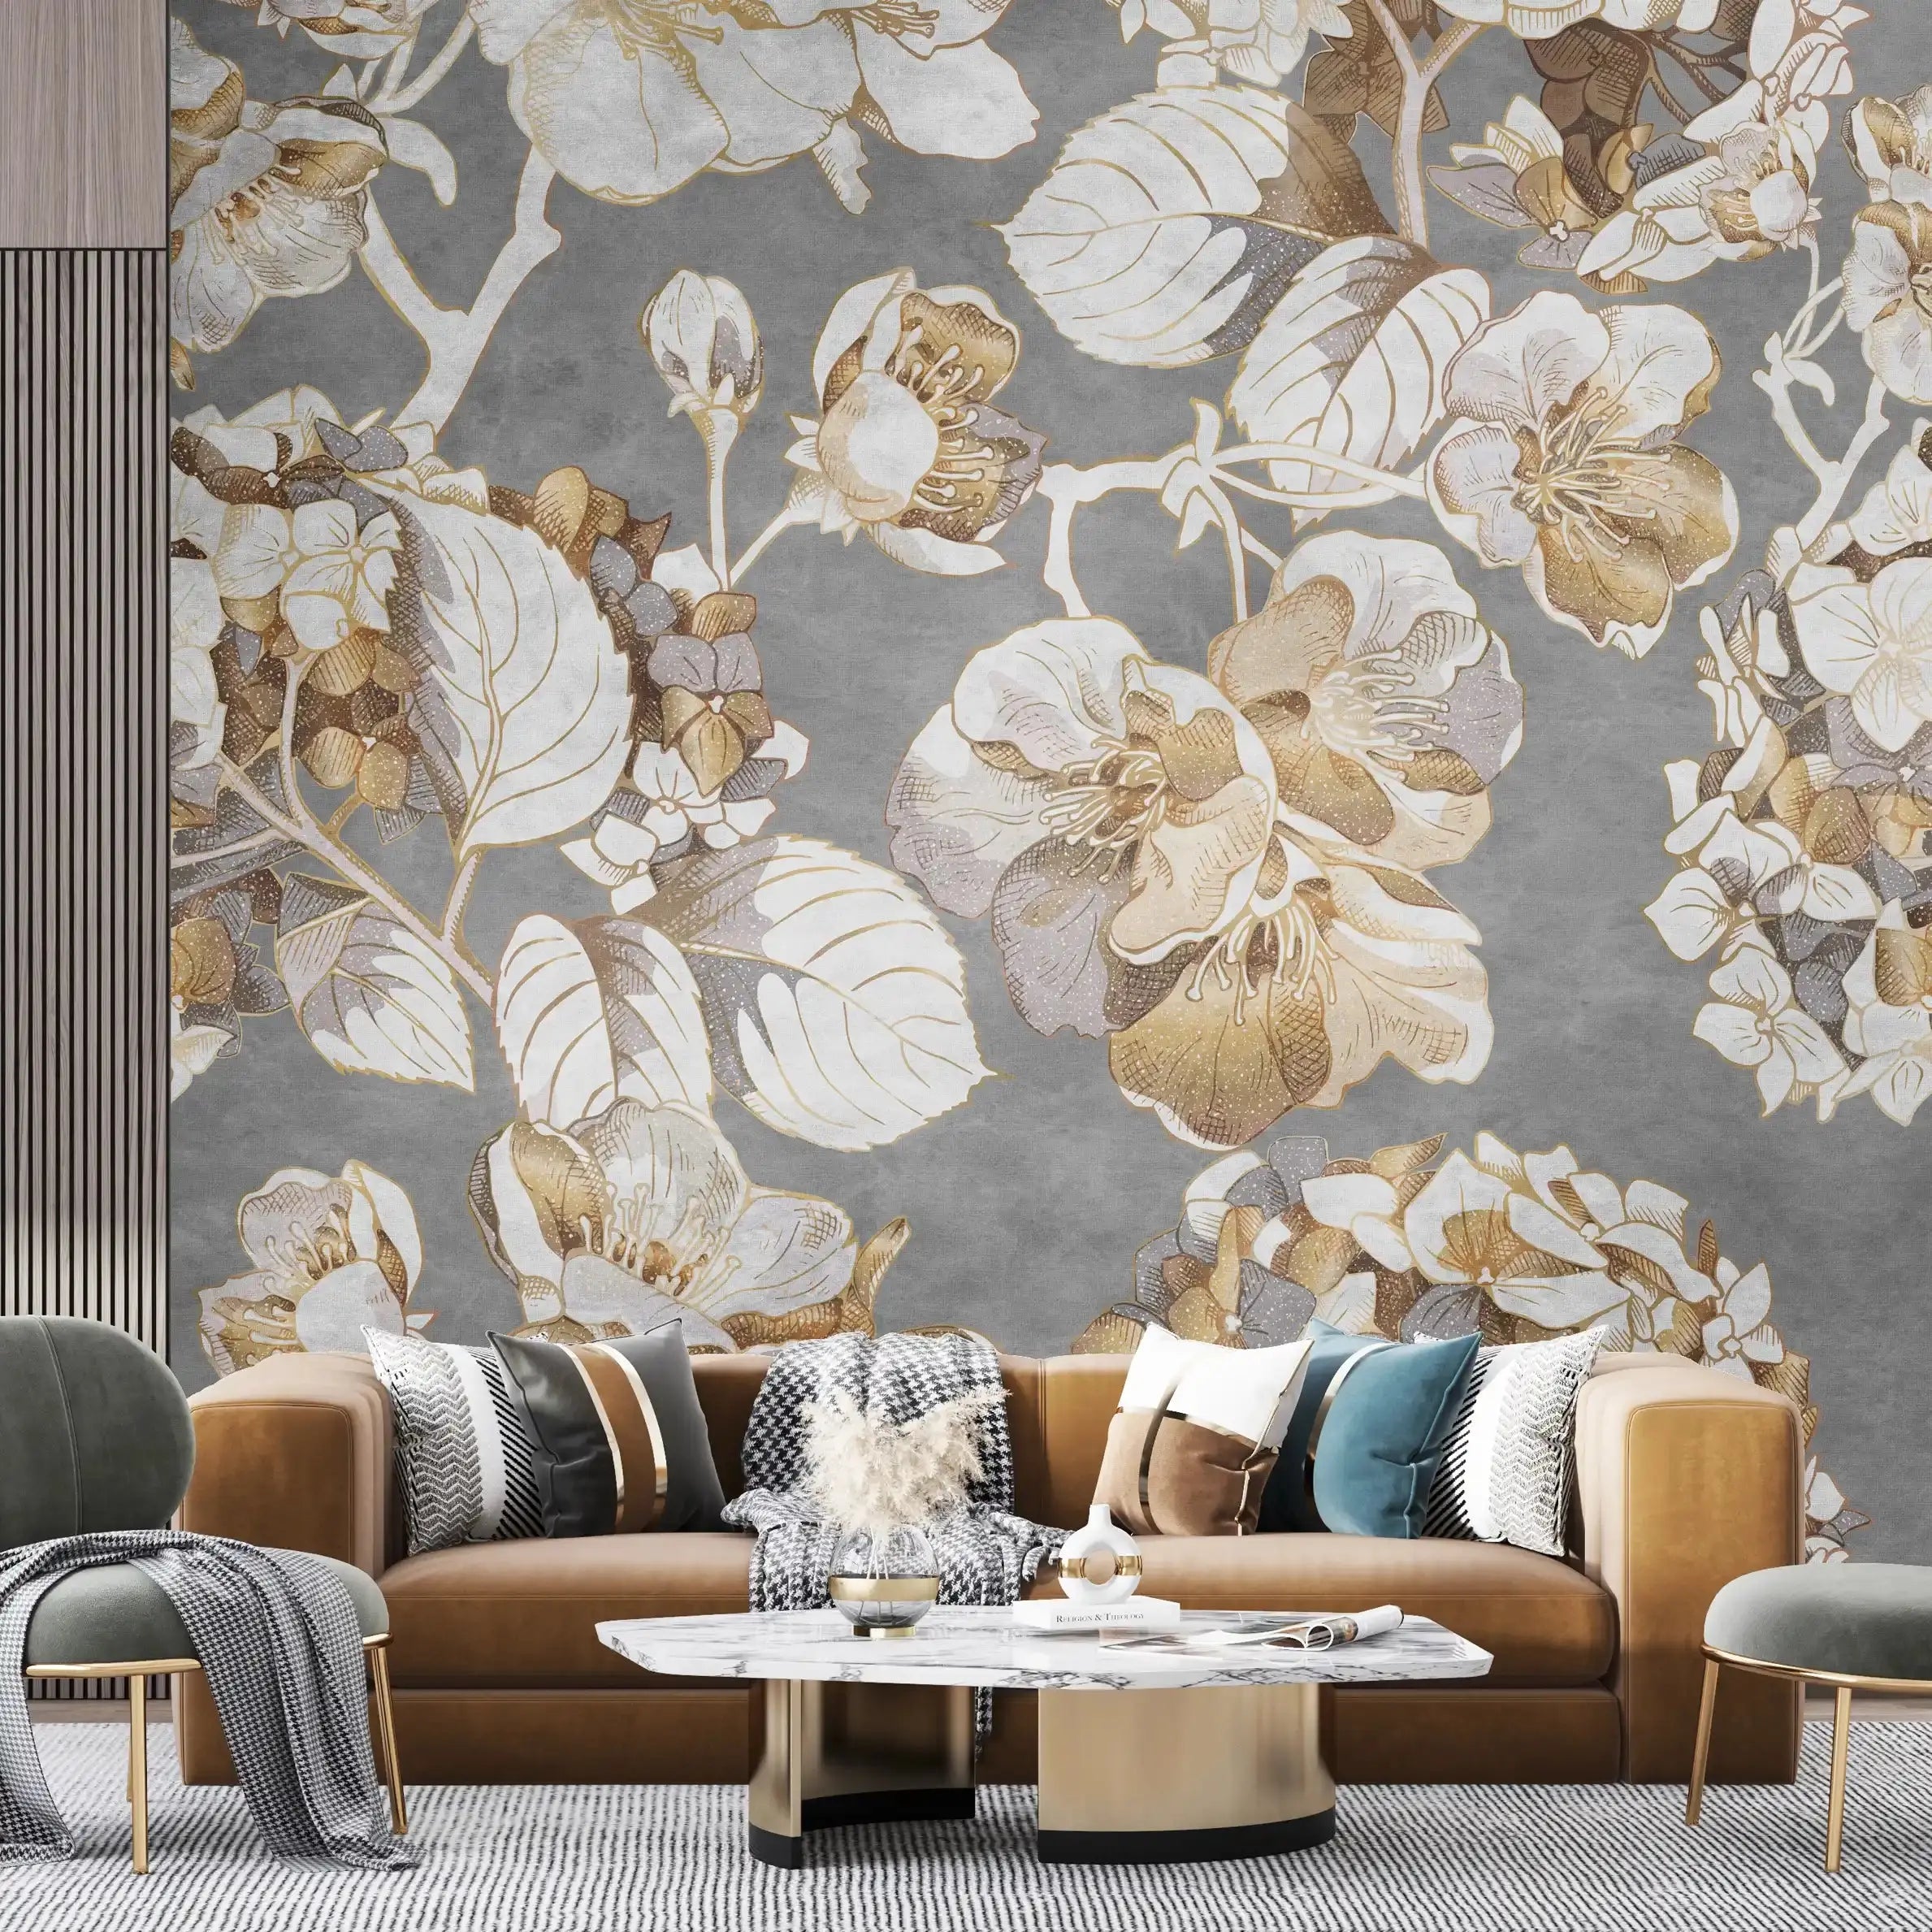 3036-E / Vintage Floral Mural Wallpaper: Grey and Brown Art Style, Easy Install for Accent Wall Decor and Bathroom - Artevella